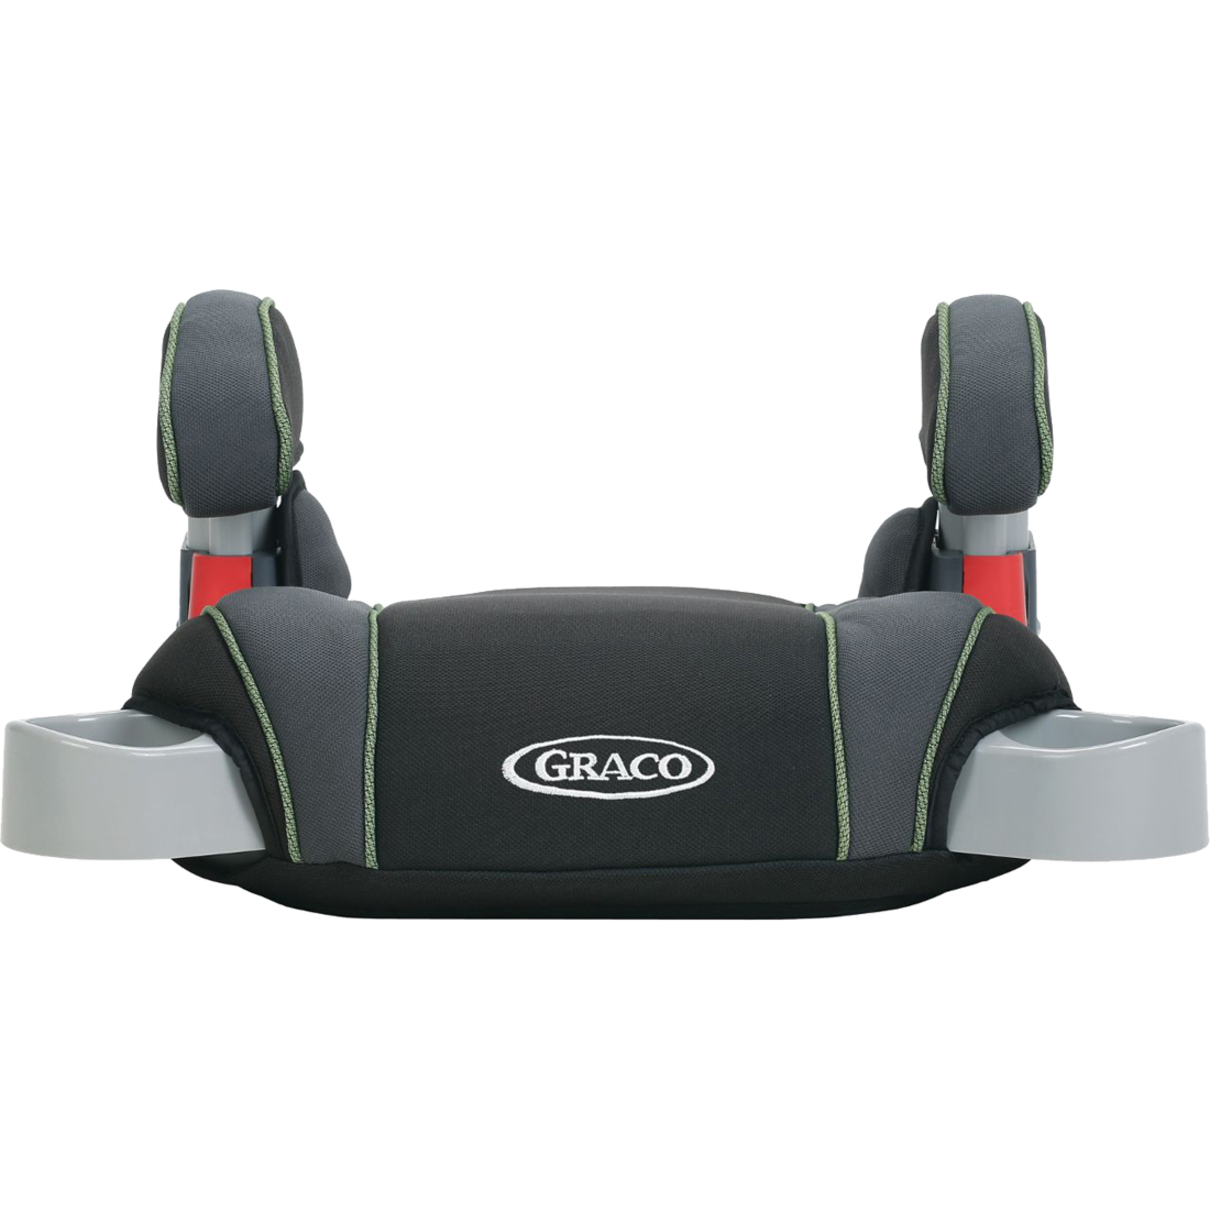 Graco Backless TurboBooster Car Seat Emory - image 3 of 3